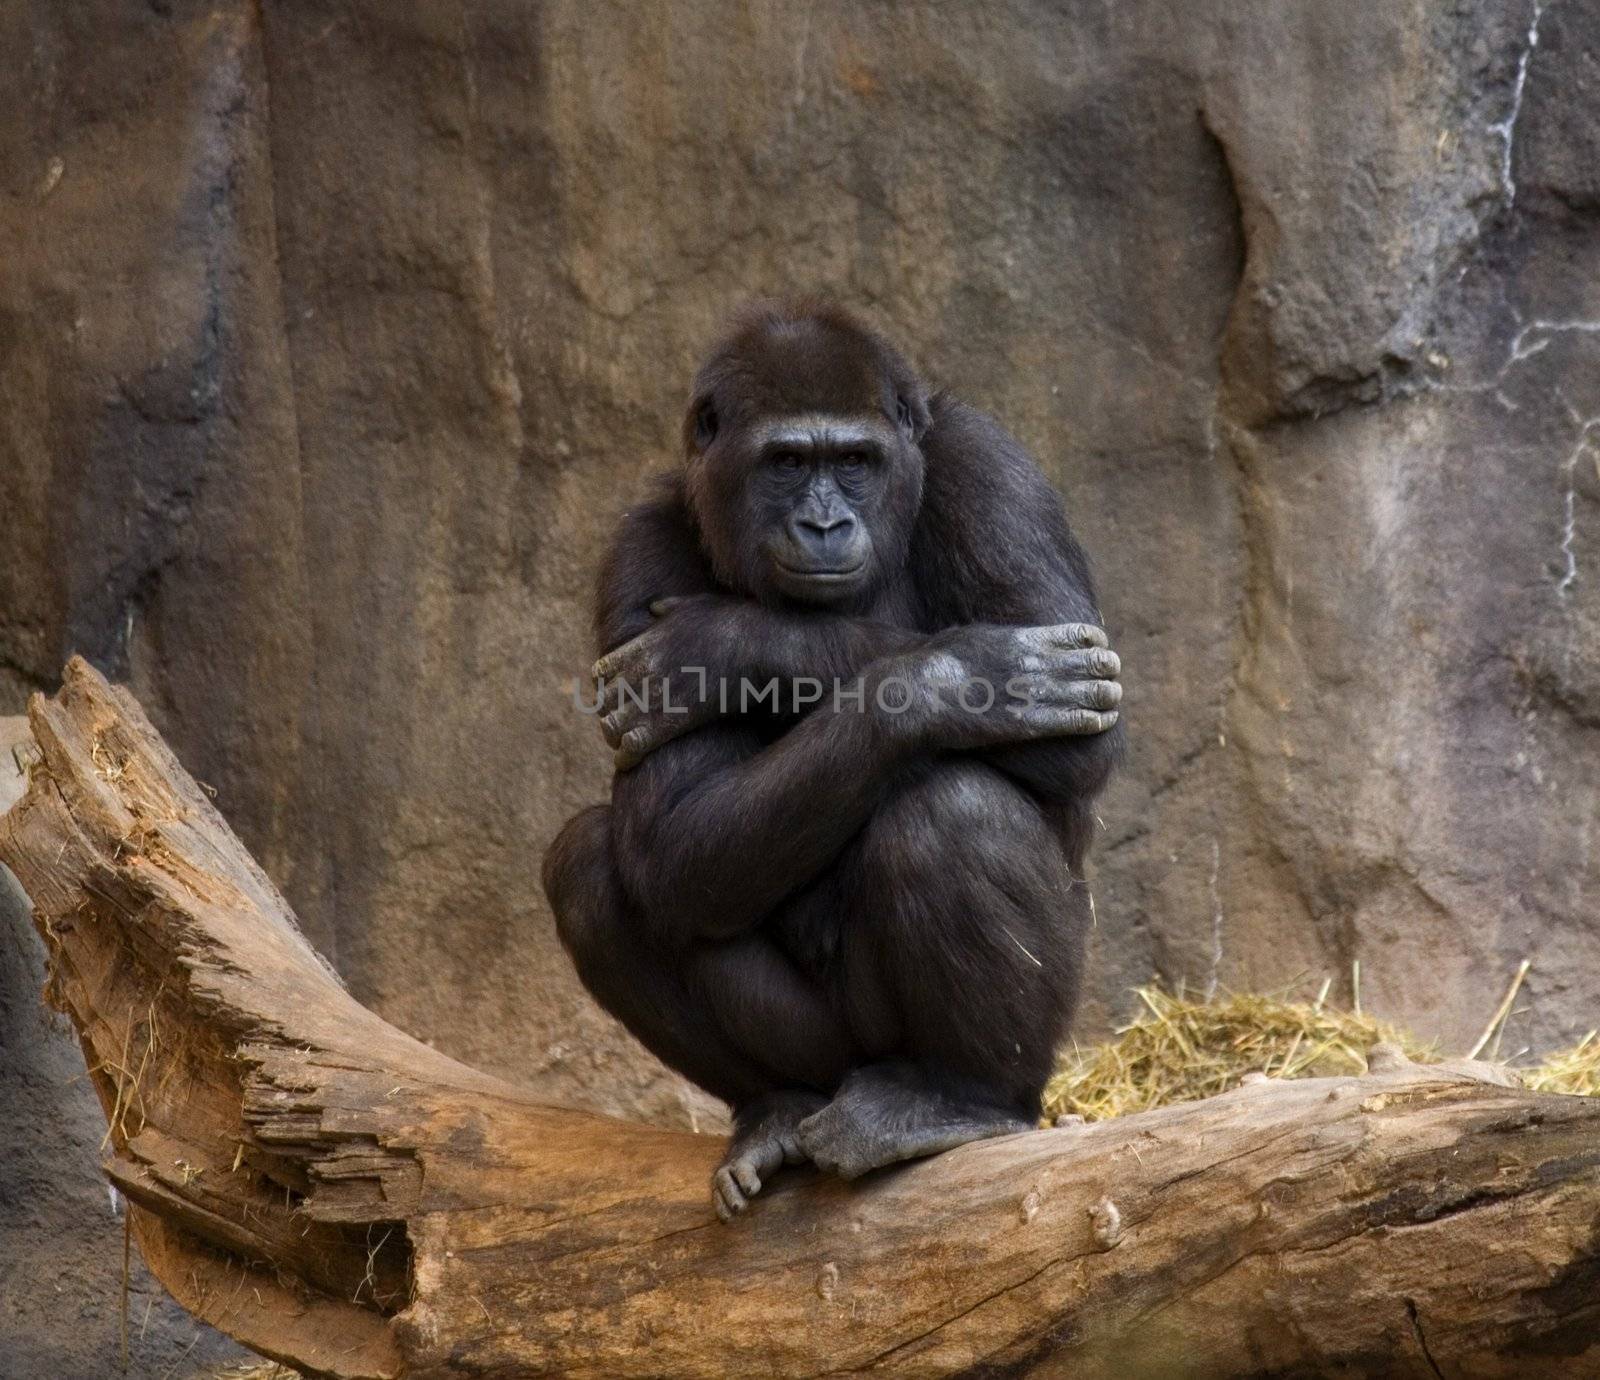  Gorilla, Ape, thinking and looking out at the crowd